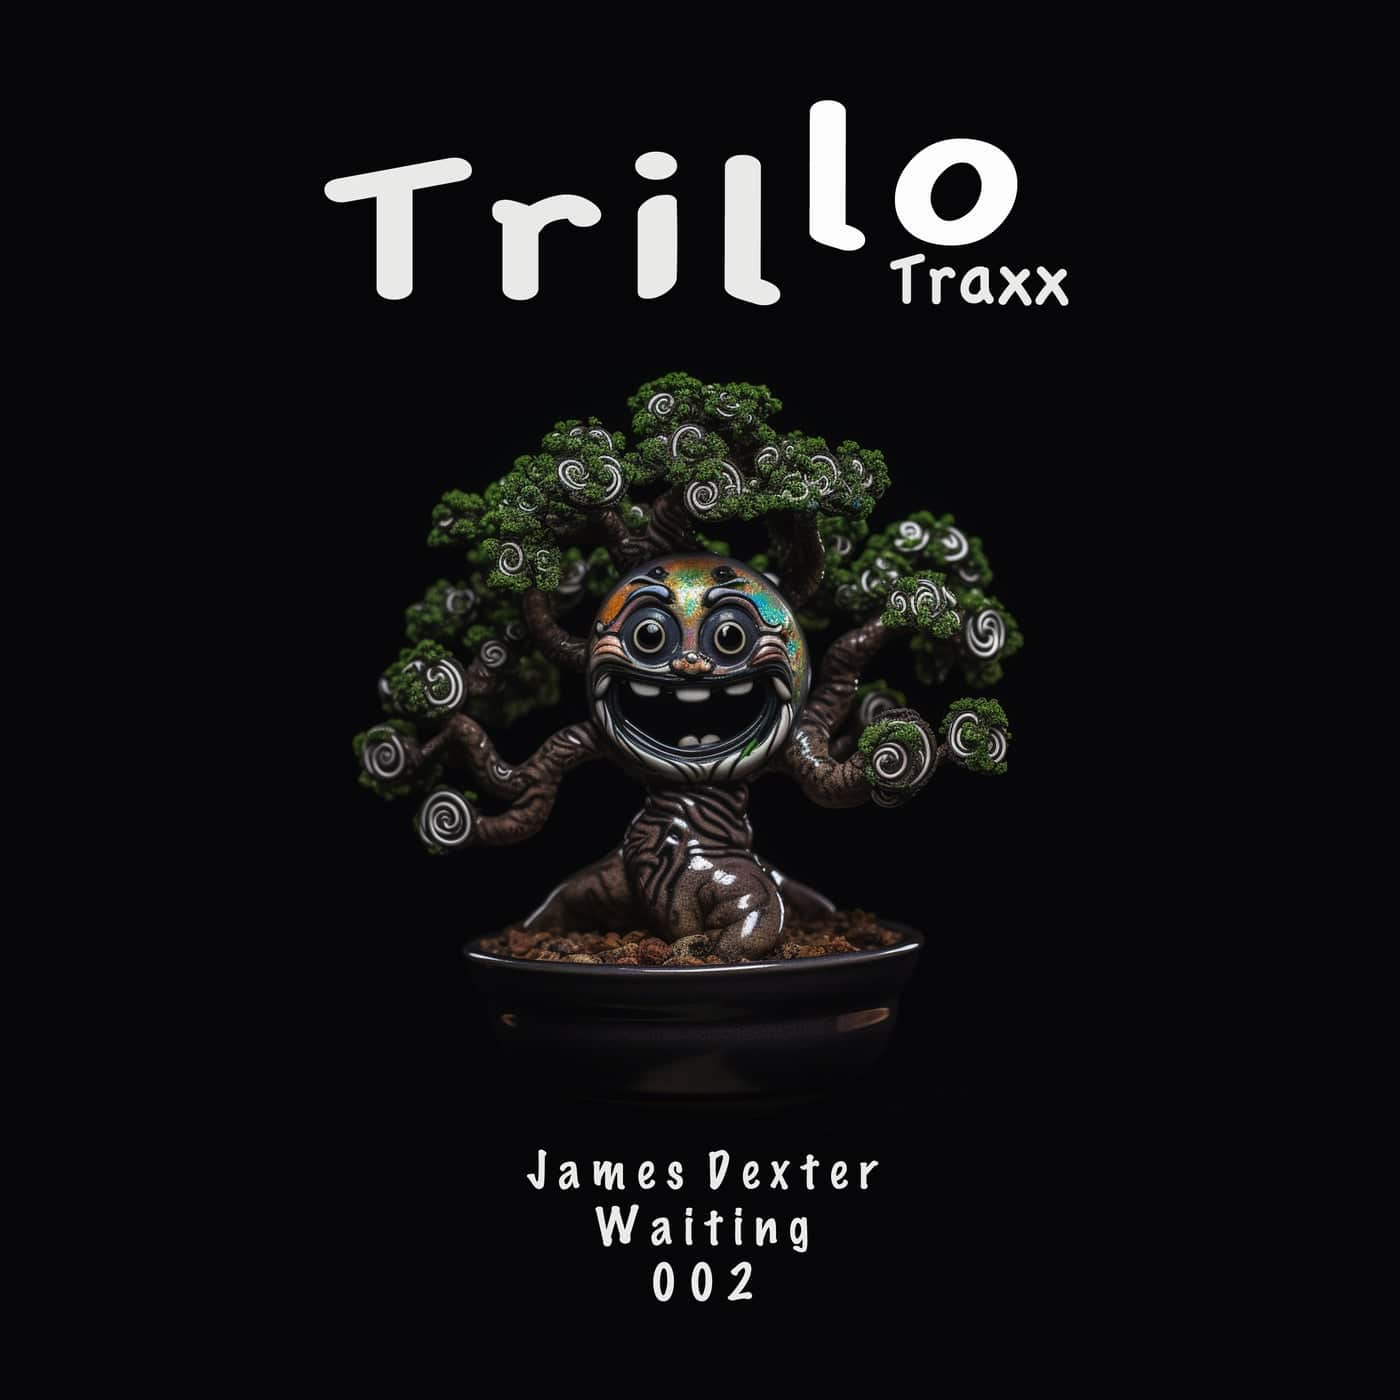 image cover: Waiting by James Dexter on Trillo Traxx